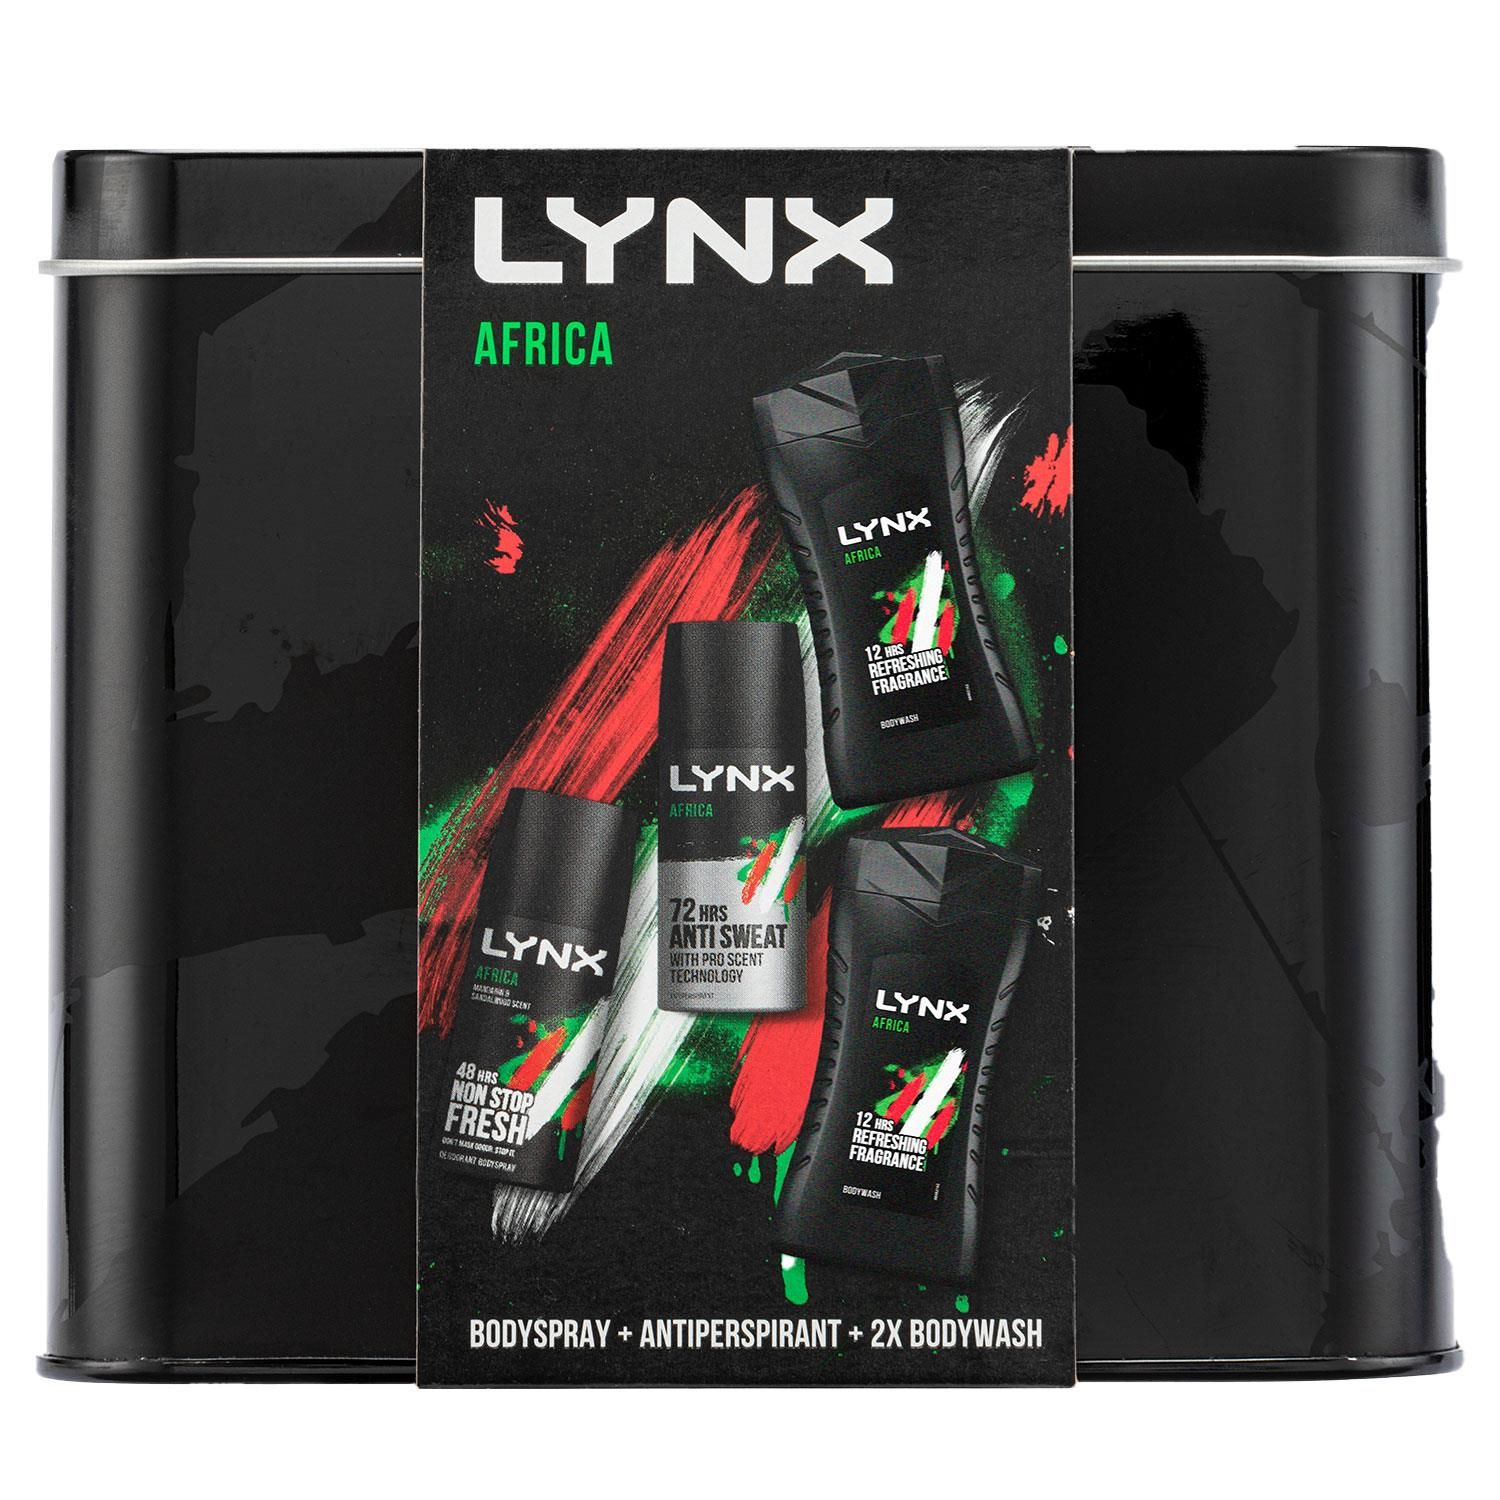 Looking for a gift for dad We have got you covered in style with the much-loved LYNX Africa fragrance. Give the ultimate gift with our iconic LYNX Africa Mini Tin Gift Set - ideal for dads everywhere! There will be no need to fake happiness when he unwraps this bad boy. Trust us. This gift set teams LYNX Africa Body spray, Bodywash and Antiperspirant Deodorant Spray together, so he can have the confidence to be the best version of the only thing he can be - himself. Developed using our unique pro-scent technology, LYNX Africa Antiperspirant will give him 72-hour sweat and odour protection while the aromatic, sweet and warm scent of LYNX Africa Bodywash will keep him smelling and feeling fresh all day. This set of gifts for men comes in a stylish black tin box that is practical and generous enough to keep all his LYNX toiletries in one place. The perfect present for him this Christmas Festive, this gift set will bring back so many good memories and help him be on top of his game - no matter what comes his way, he will be ready with an iconic scene! 

Features:
Kick-start your day with a refreshing shower enhanced with our iconic Africa fragrance that never goes out of style
Lynx Africa Shower Gel washes away odour and provides up to 12 hours of refreshing fragrance
Lynx Africa Antiperspirant Deodorant Spray for Men gives you 48-hour protection against sweat and body odour
Strong antiperspirant spray effectively protects you against excessive sweating and the odour that too often goes with it

Safety Warning: Avoid contact with eyes. If contact occurs, rinse thoroughly with water. Avoid direct inhalation. Avoid prolonged spraying. Do not spray near your eyes. Use only as directed. Do not expose to temperatures exceeding 50°C. Keep out of reach of children.

Gift Set Includes:
1x Lynx Africa 48H Deodorant Body Spray 35ml
1x Lynx Africa 72H Antiperspirant Deodorant 35ml
2x Lynx Africa 12H Refreshing Bodywash 50ml